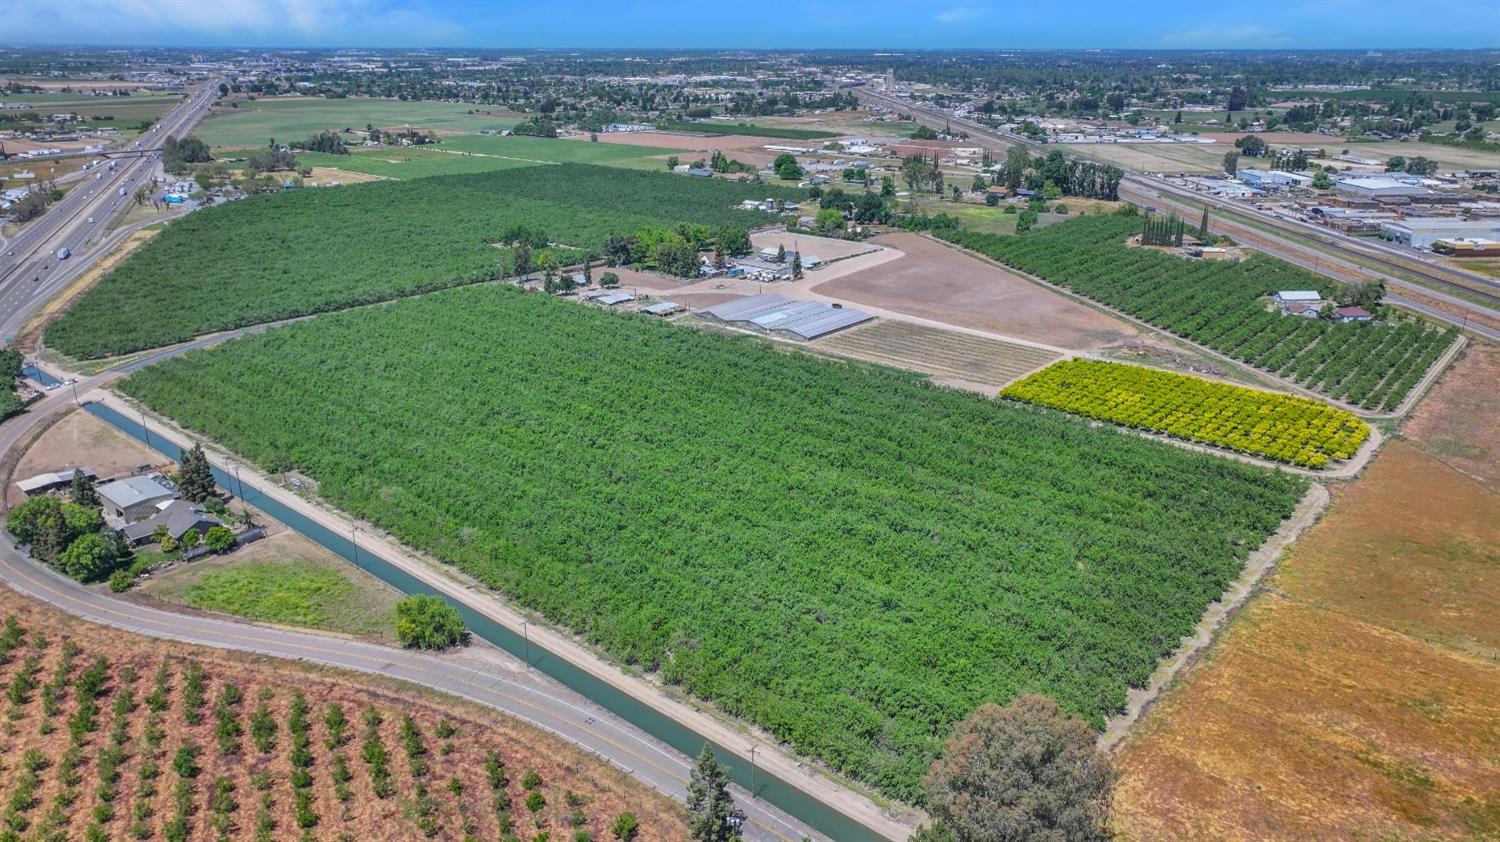 Overhead view of 2818 Youngstown Rd.(7 acres), Stanislaus Co. and 3818 Youngstown Re. (11.7 acres)in Merced Co.  both listed separately.  Boundary line is diagonal through property.